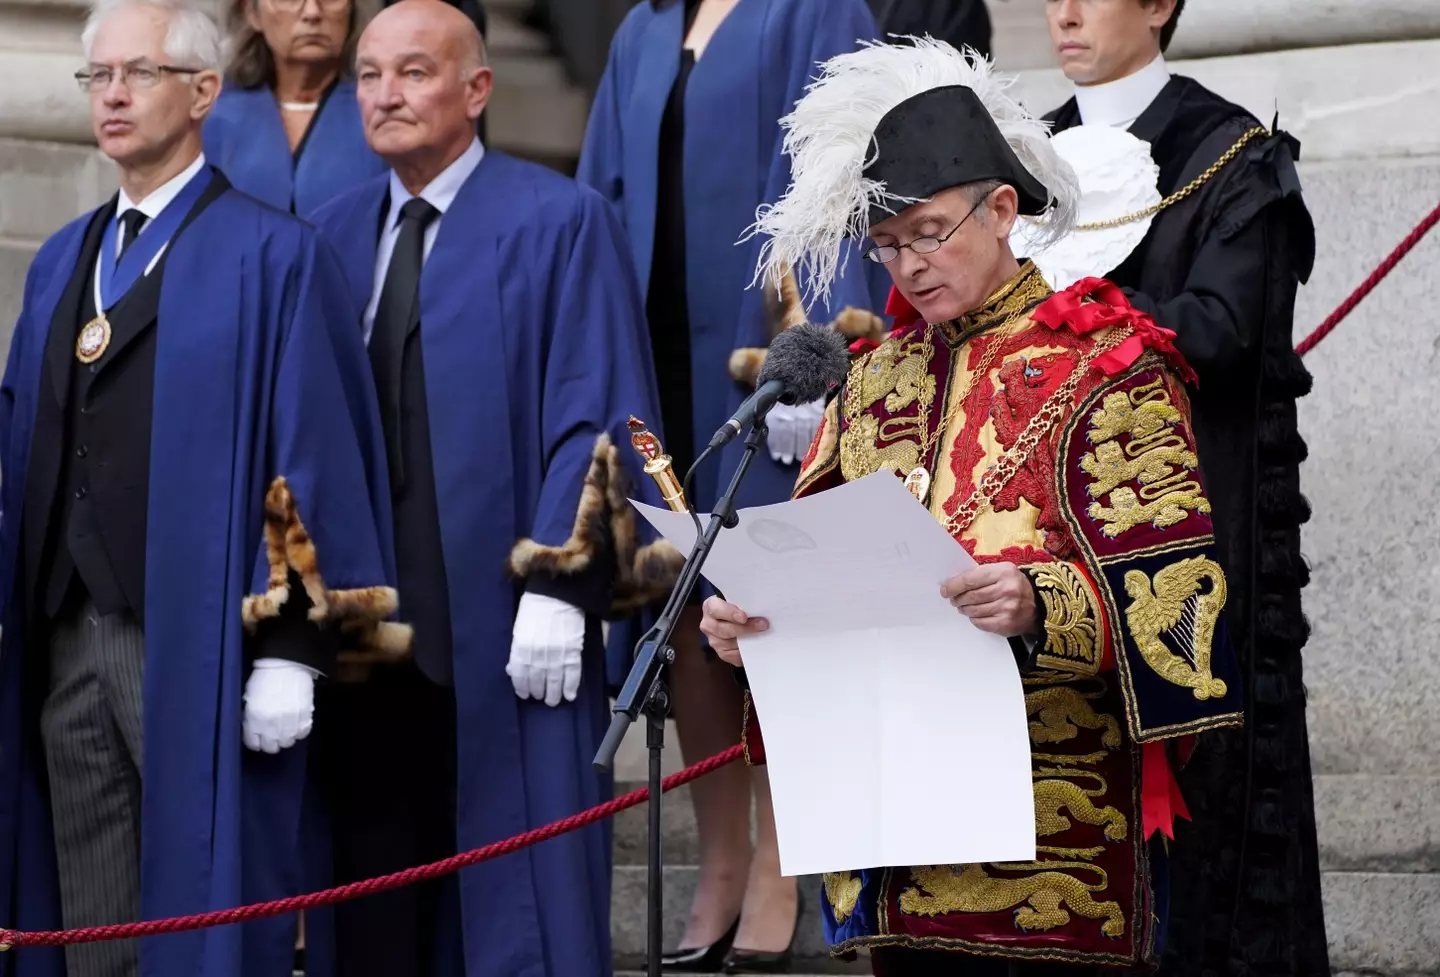 Charles III was proclaimed king at London's Royal exchange today.